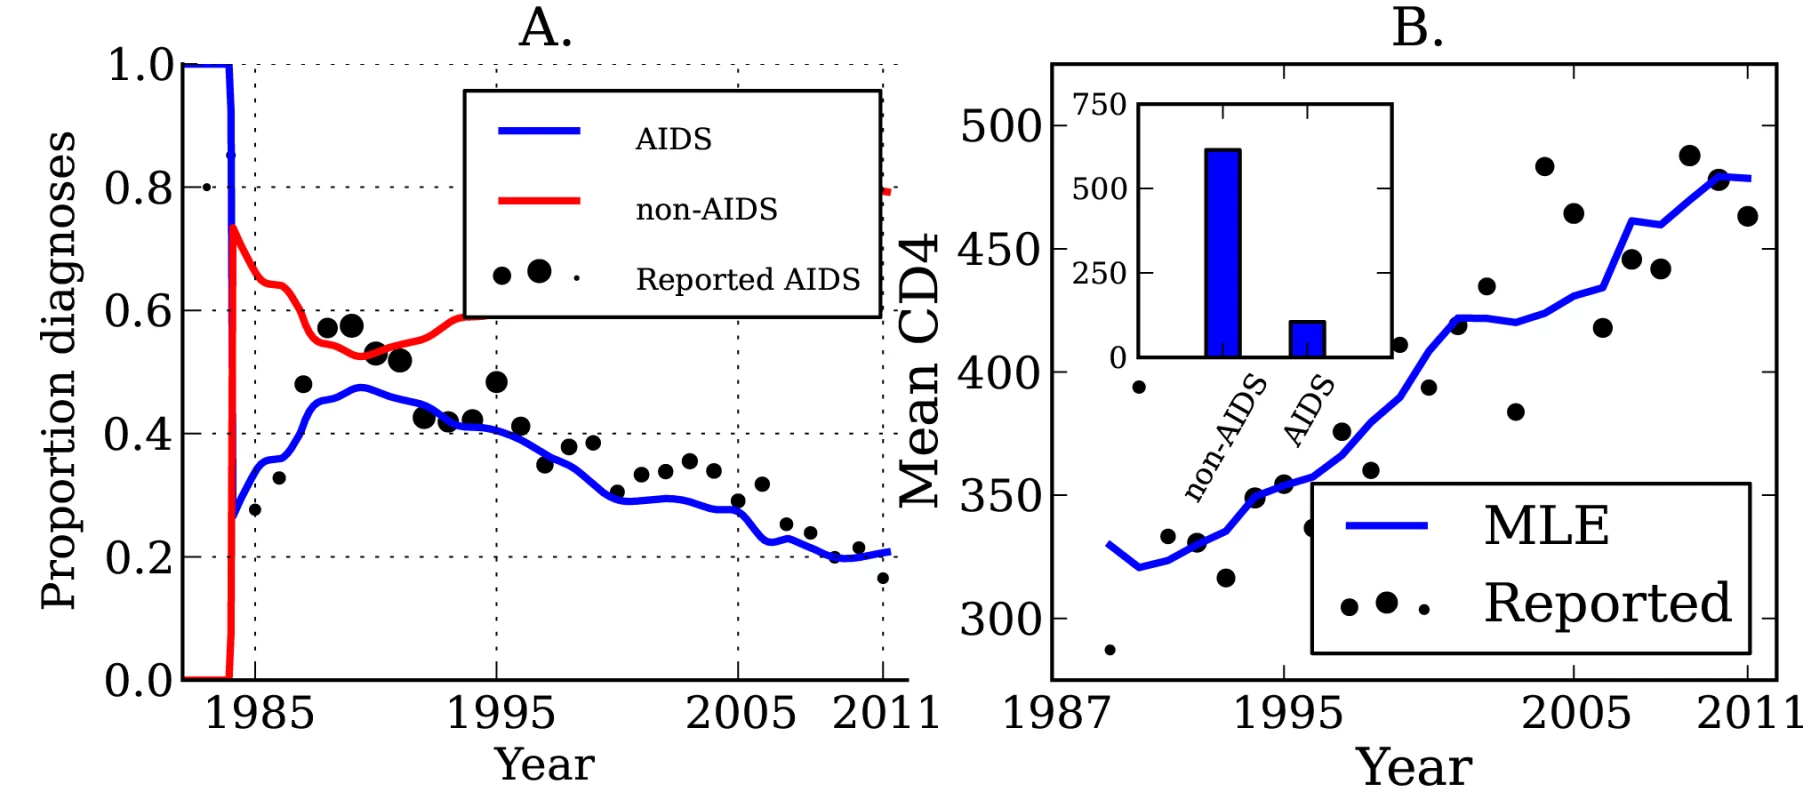 HIV diagnoses and CD4 cell count through time.